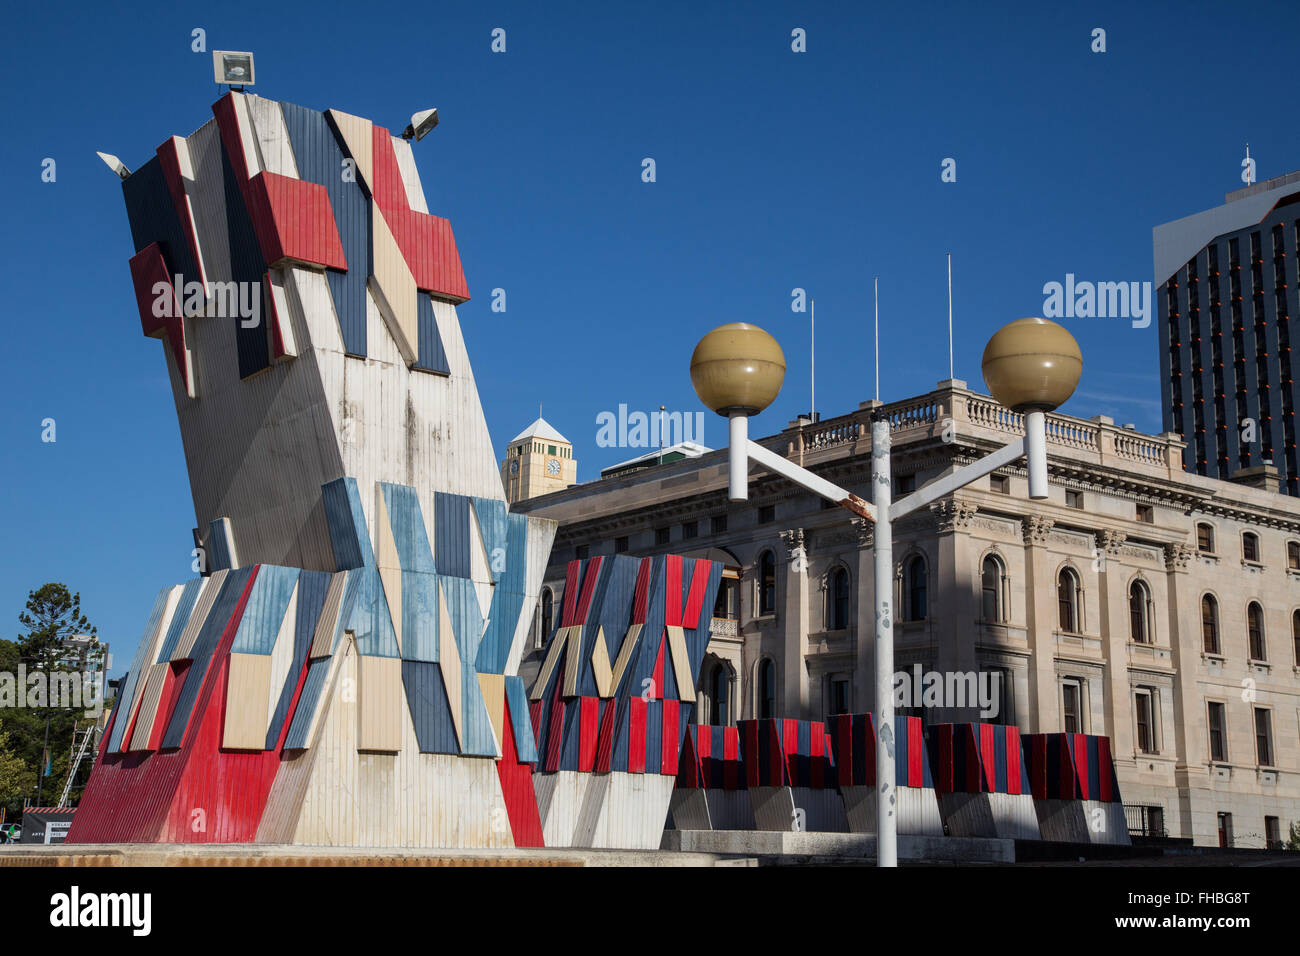 public art sculpture by Otto Herbert Hajek in front of Parliament Building in the center of Adelaide Stock Photo